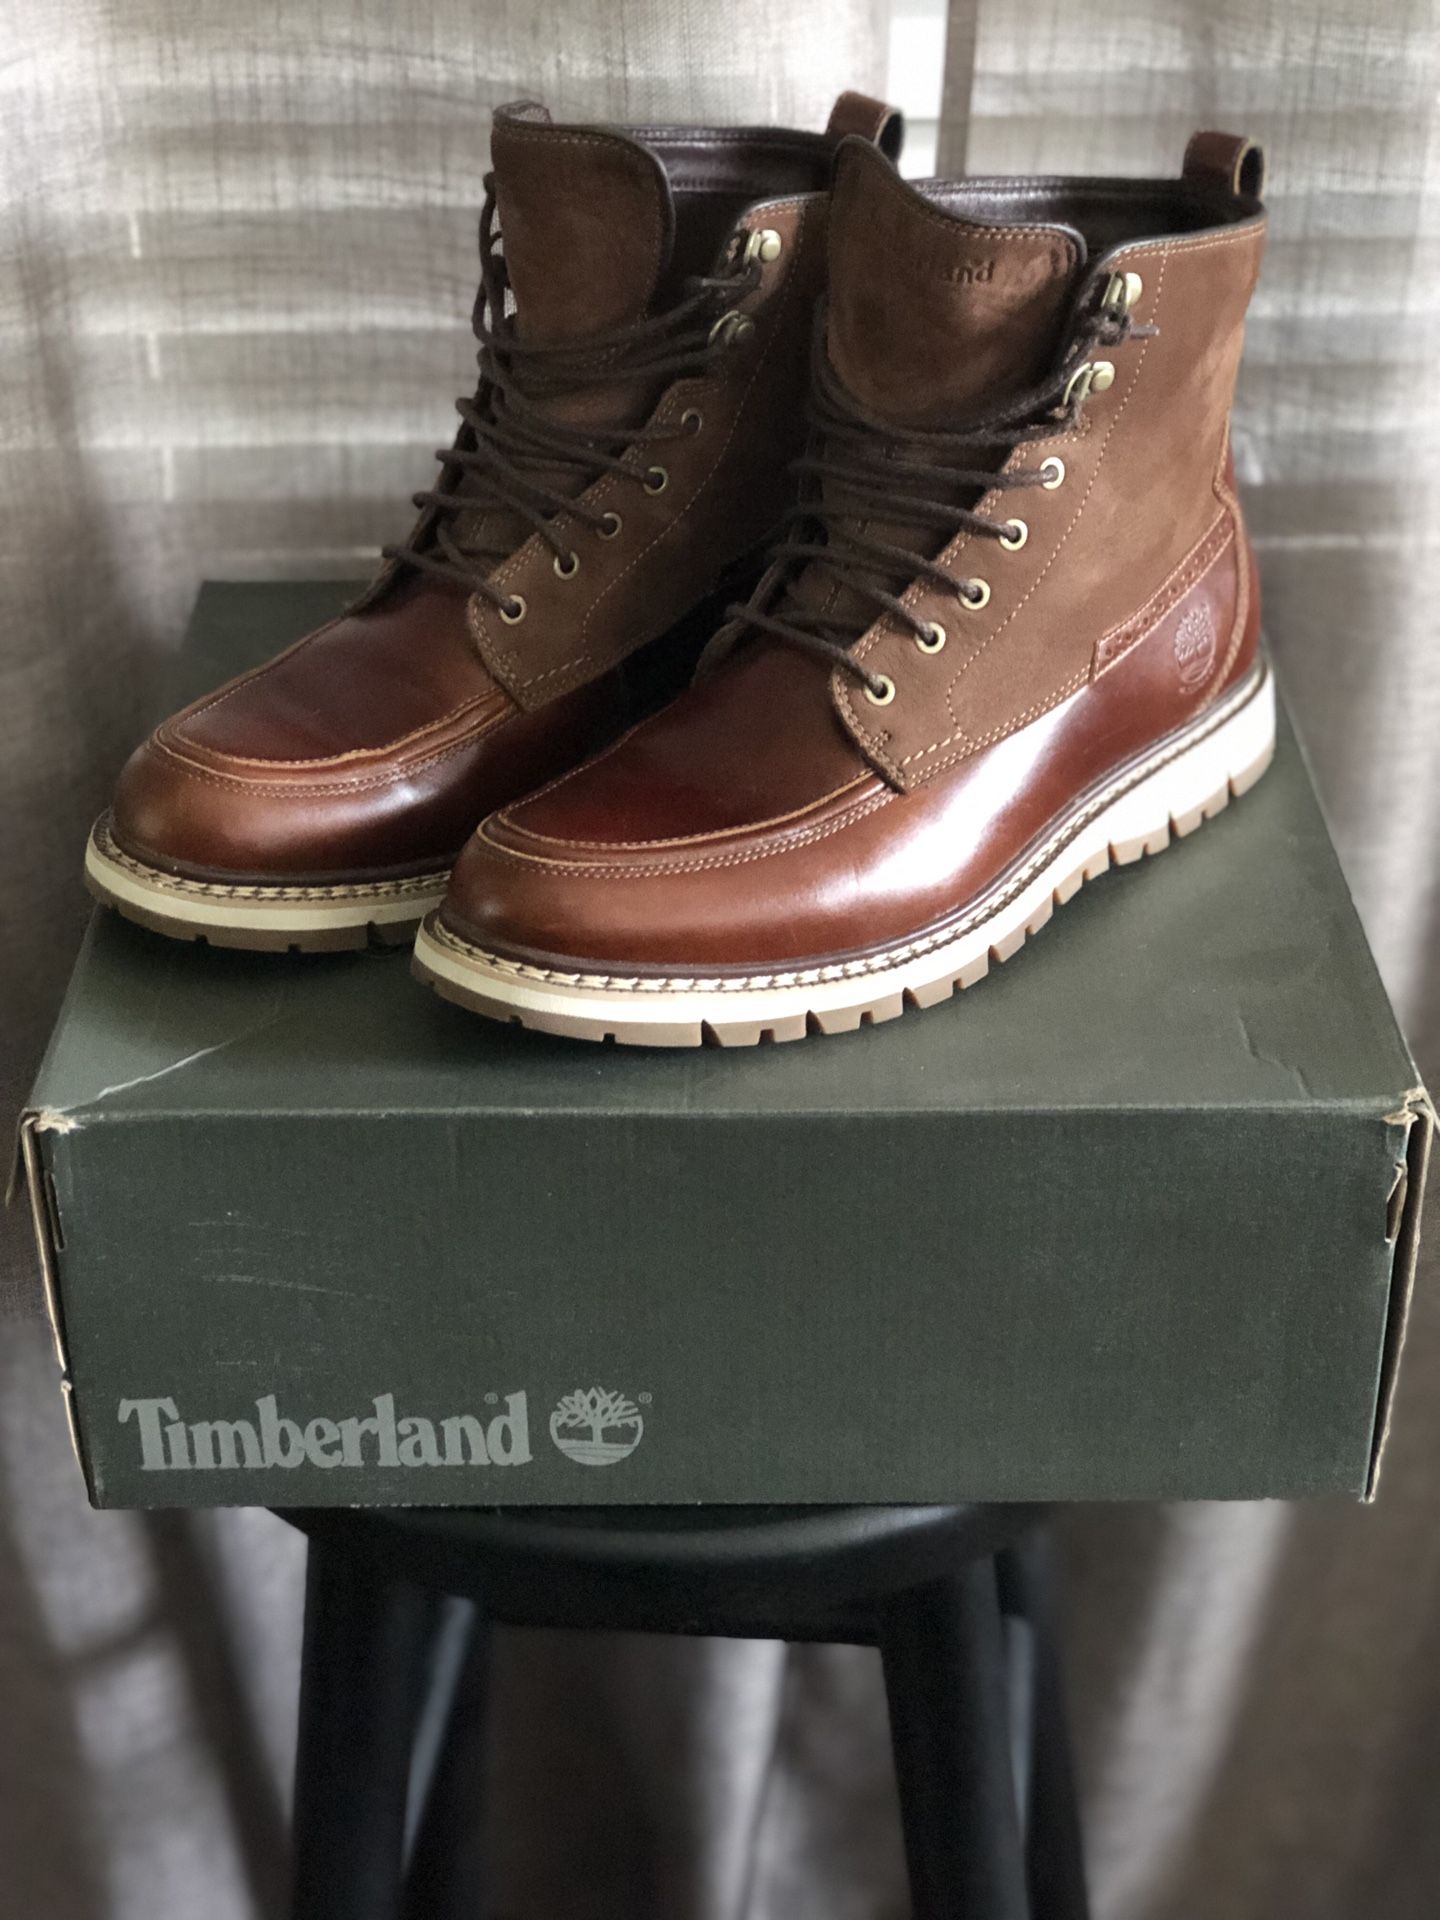 Timberland Britton hard and suede leather